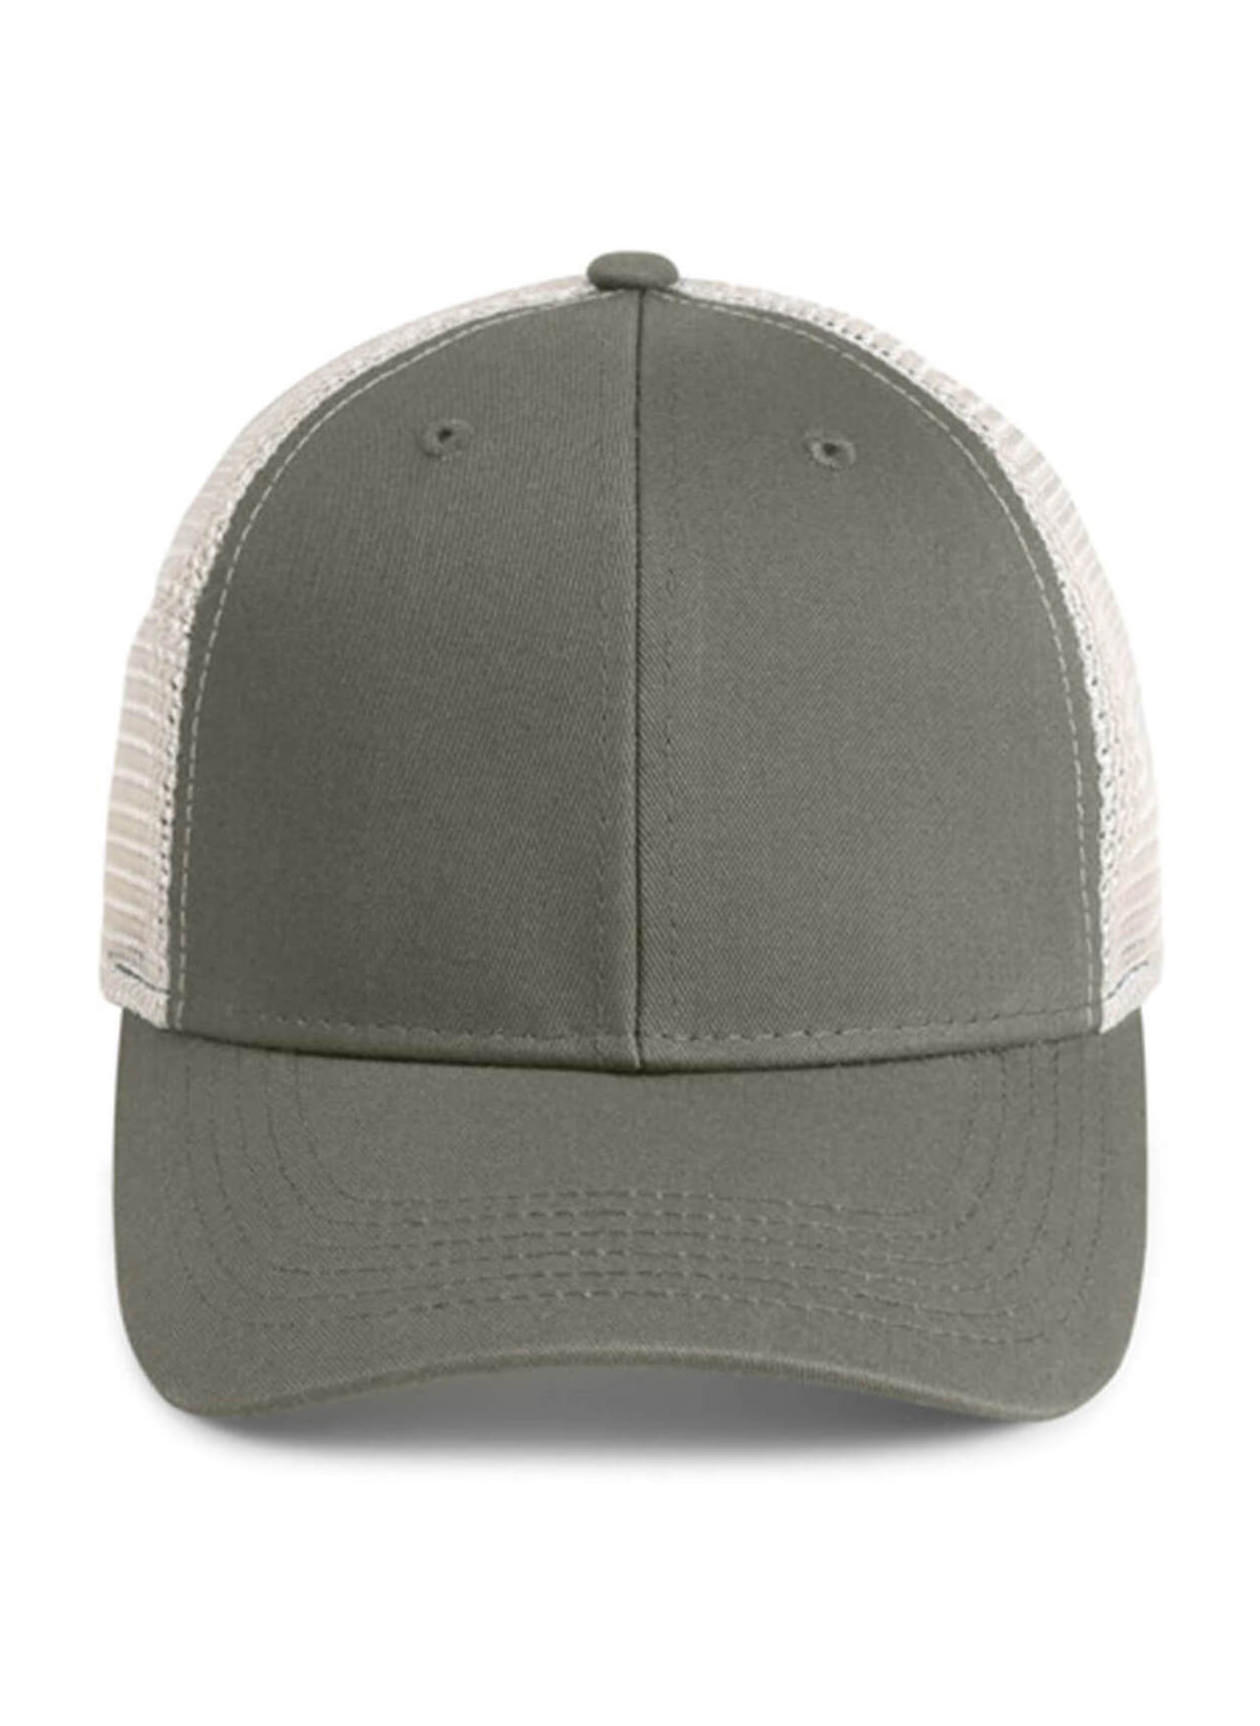 Imperial Moss / Stone The Catch & Release Hat Adjustable Meshback Hat